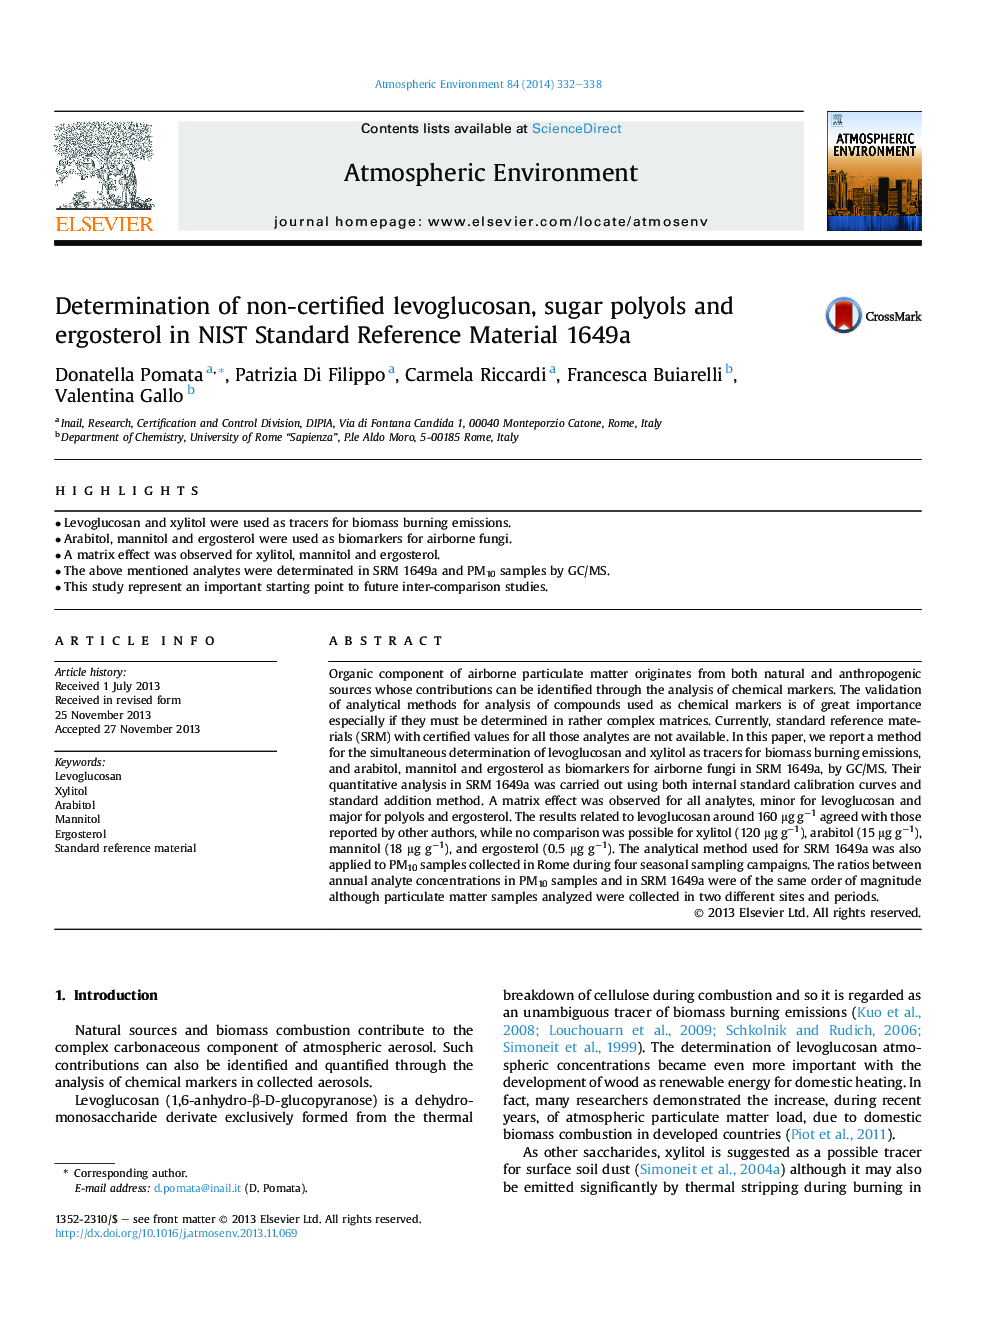 Determination of non-certified levoglucosan, sugar polyols and ergosterol in NIST Standard Reference Material 1649a